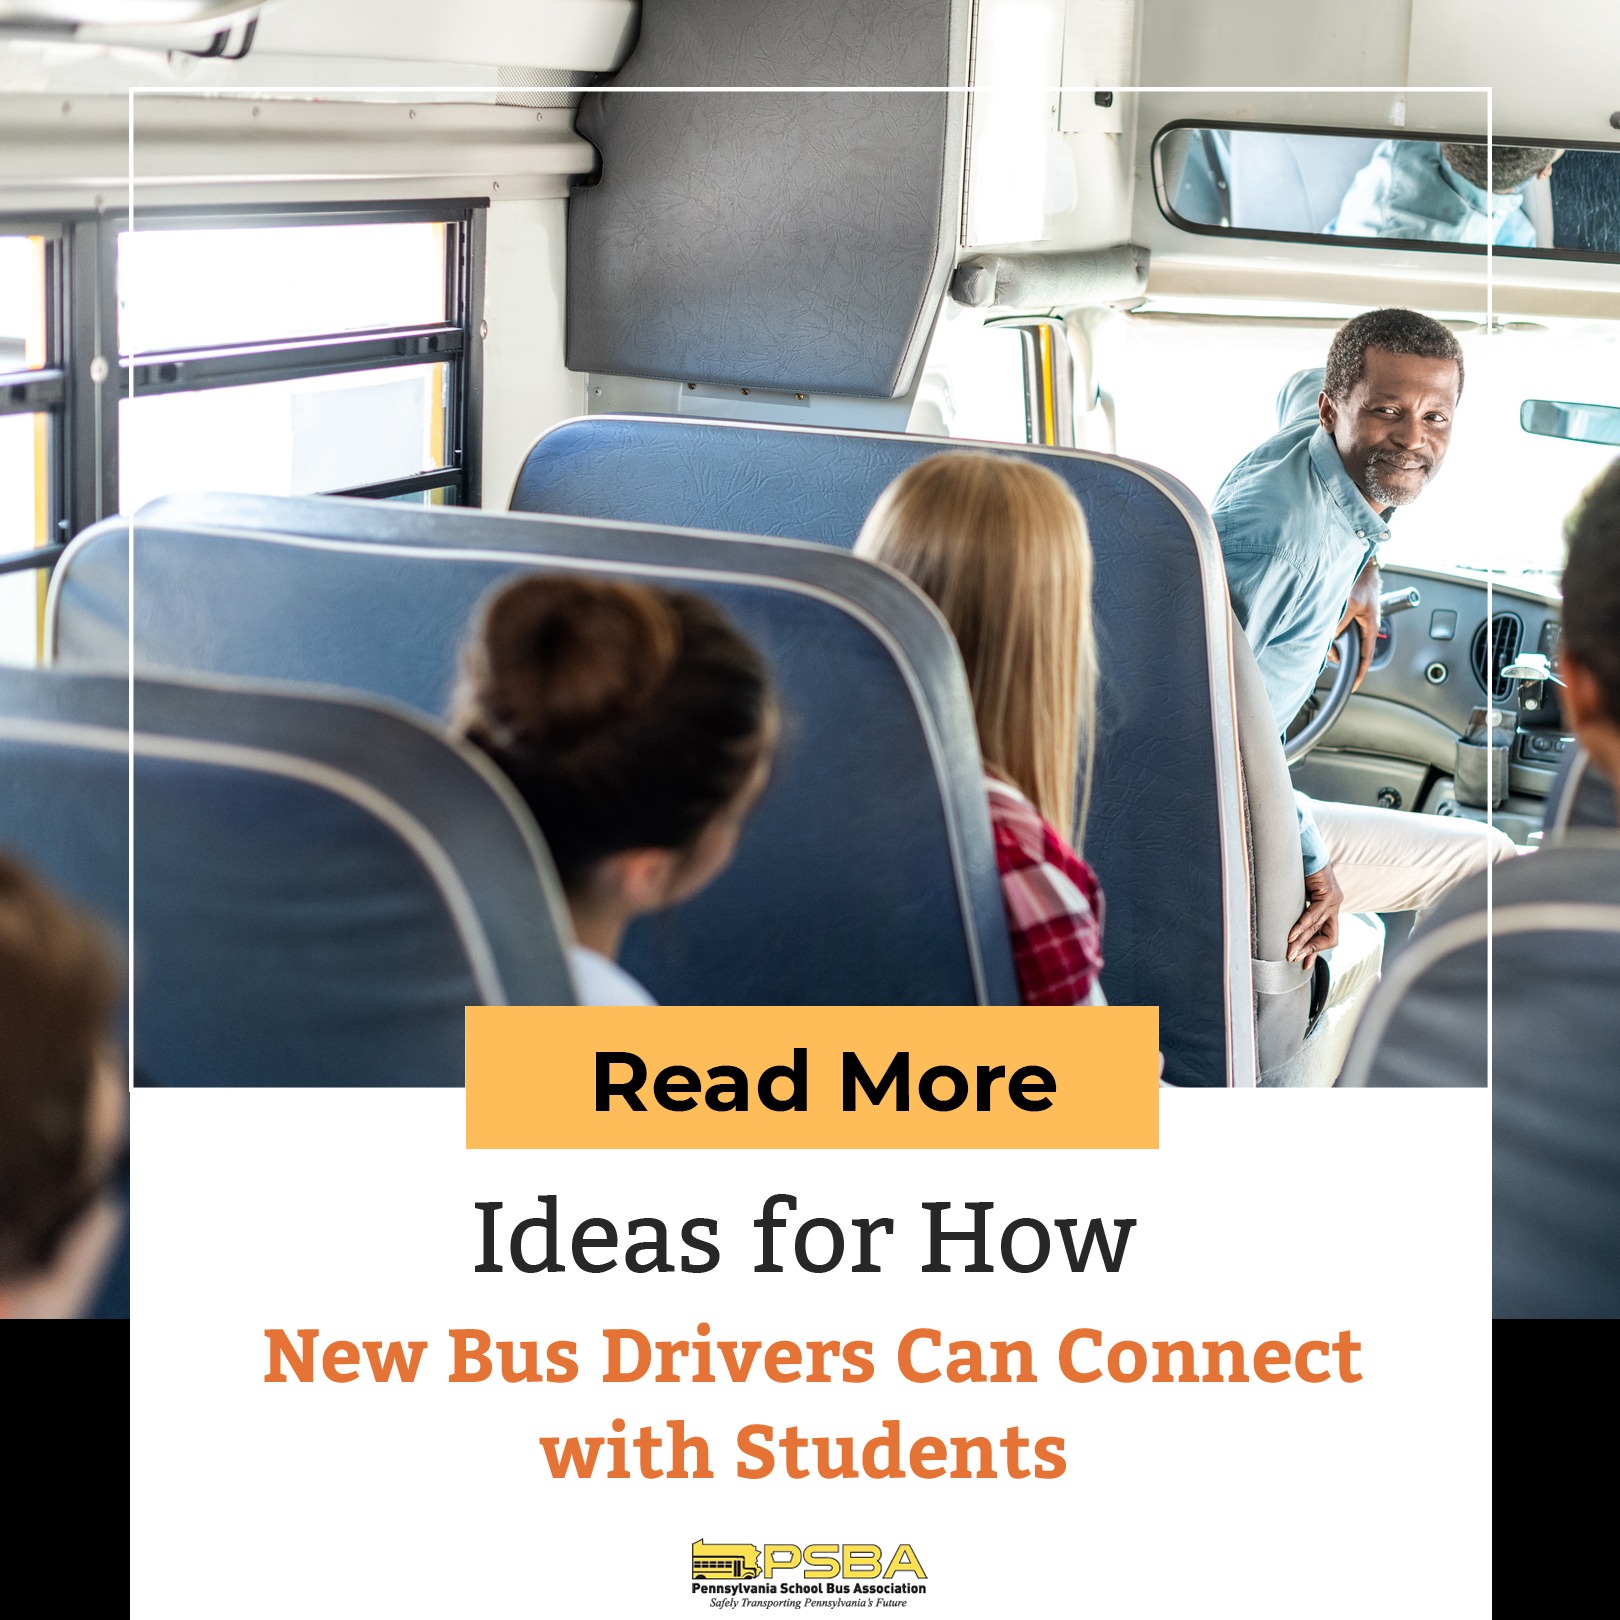 Ideas for How New Bus Drivers Can Connect with Students